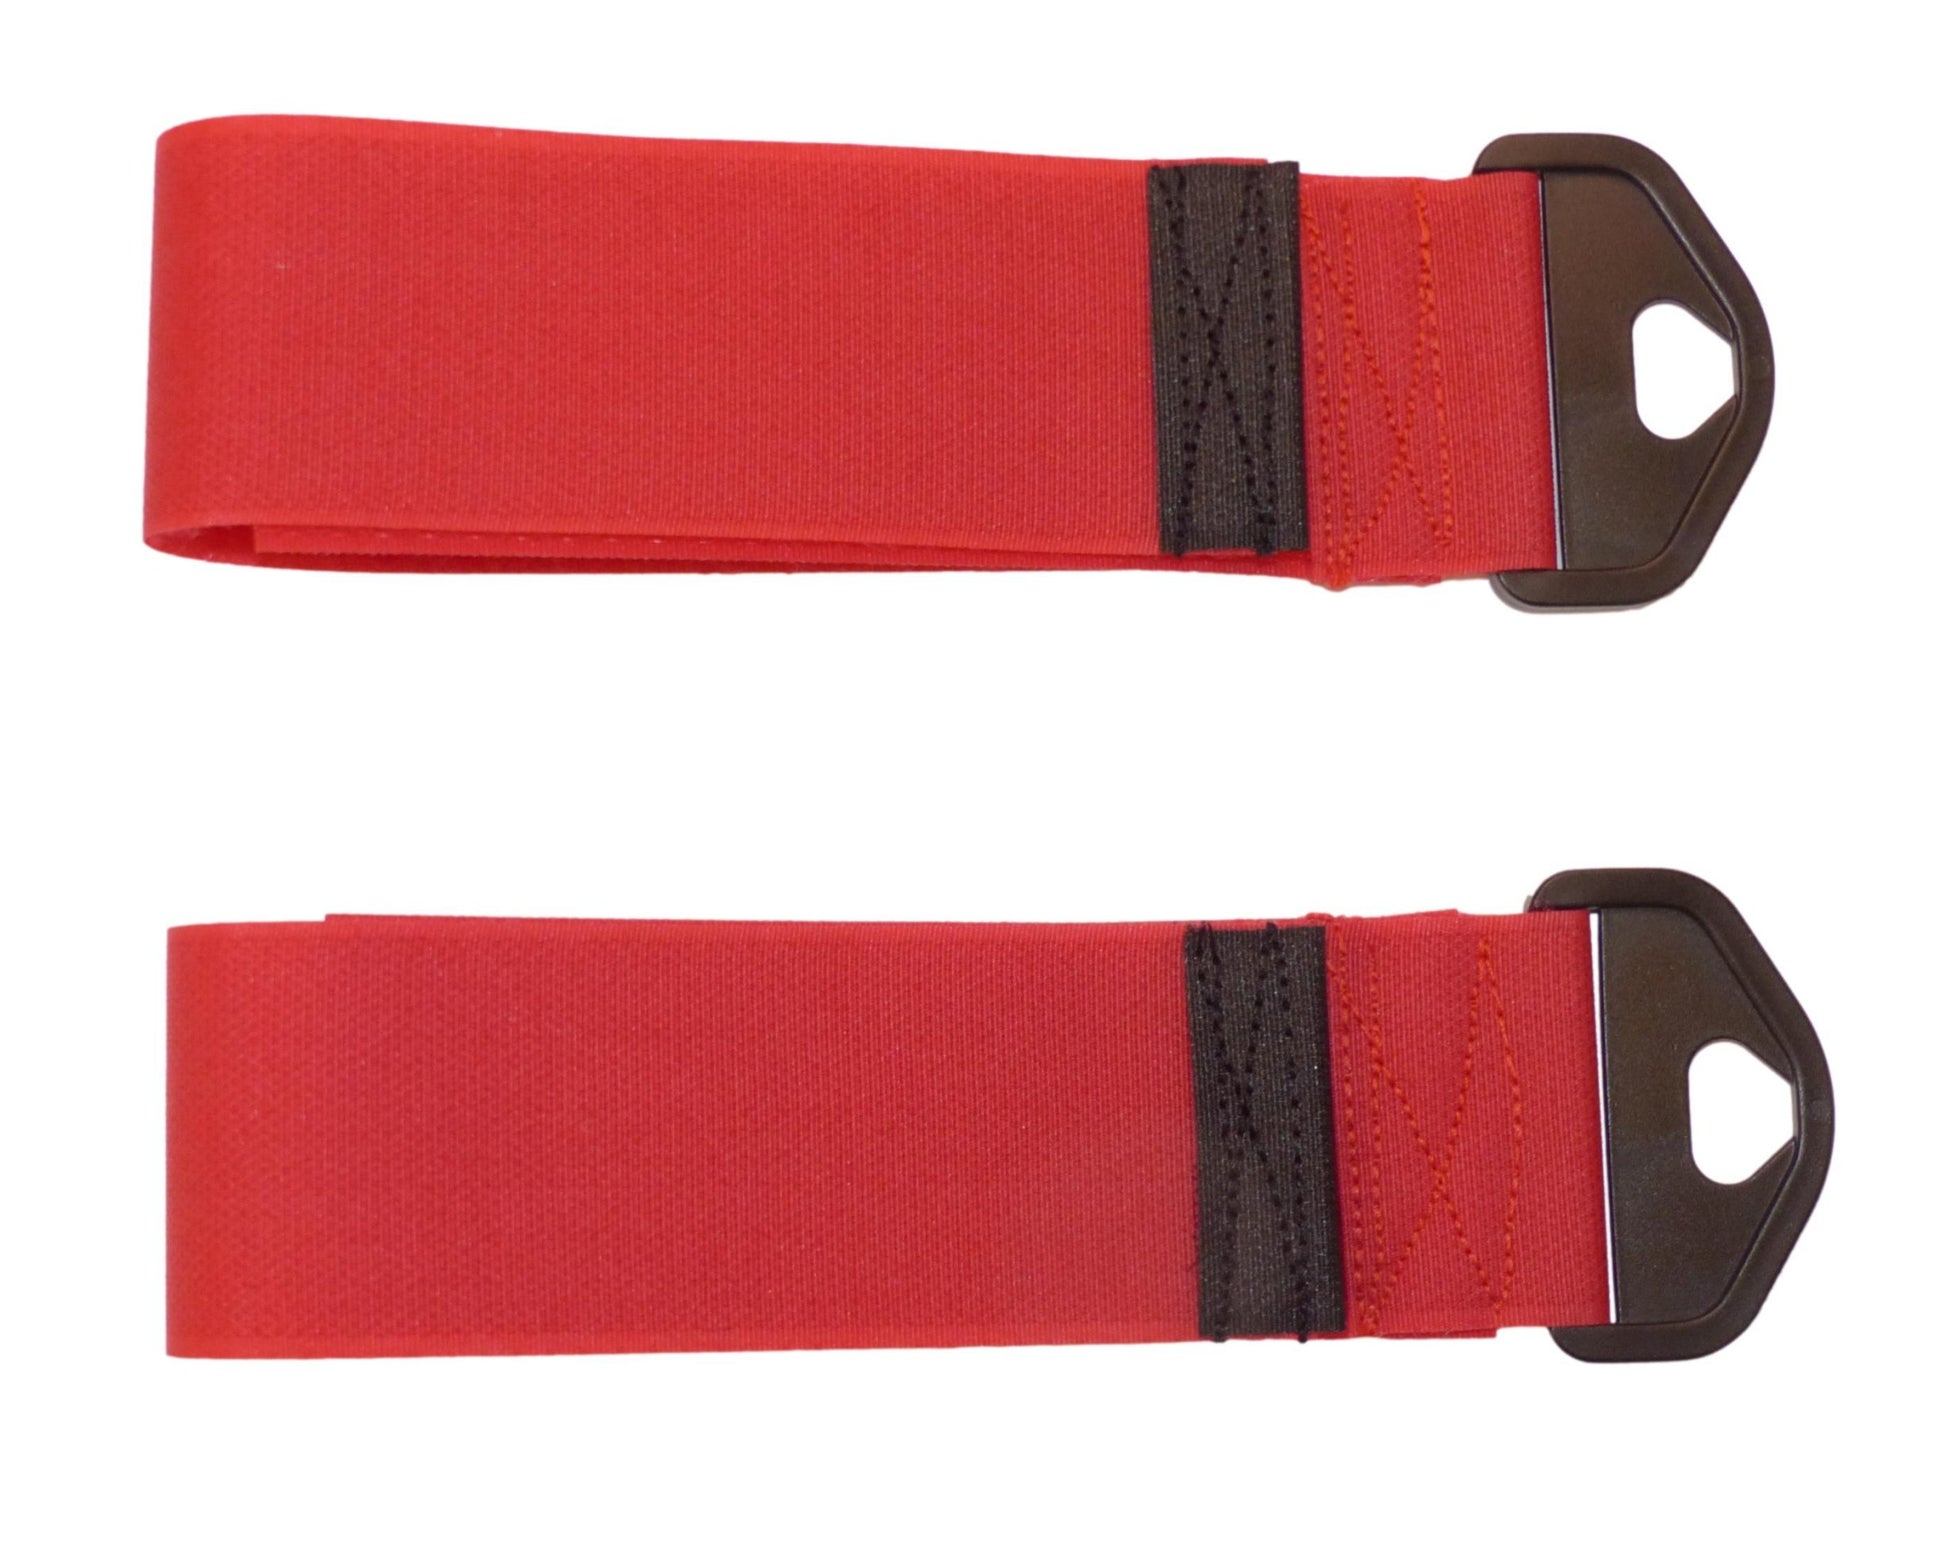 Premium 50mm Hook & Loop Tidy & Hang Strap with Strong Triangle (Pack of Two) in red